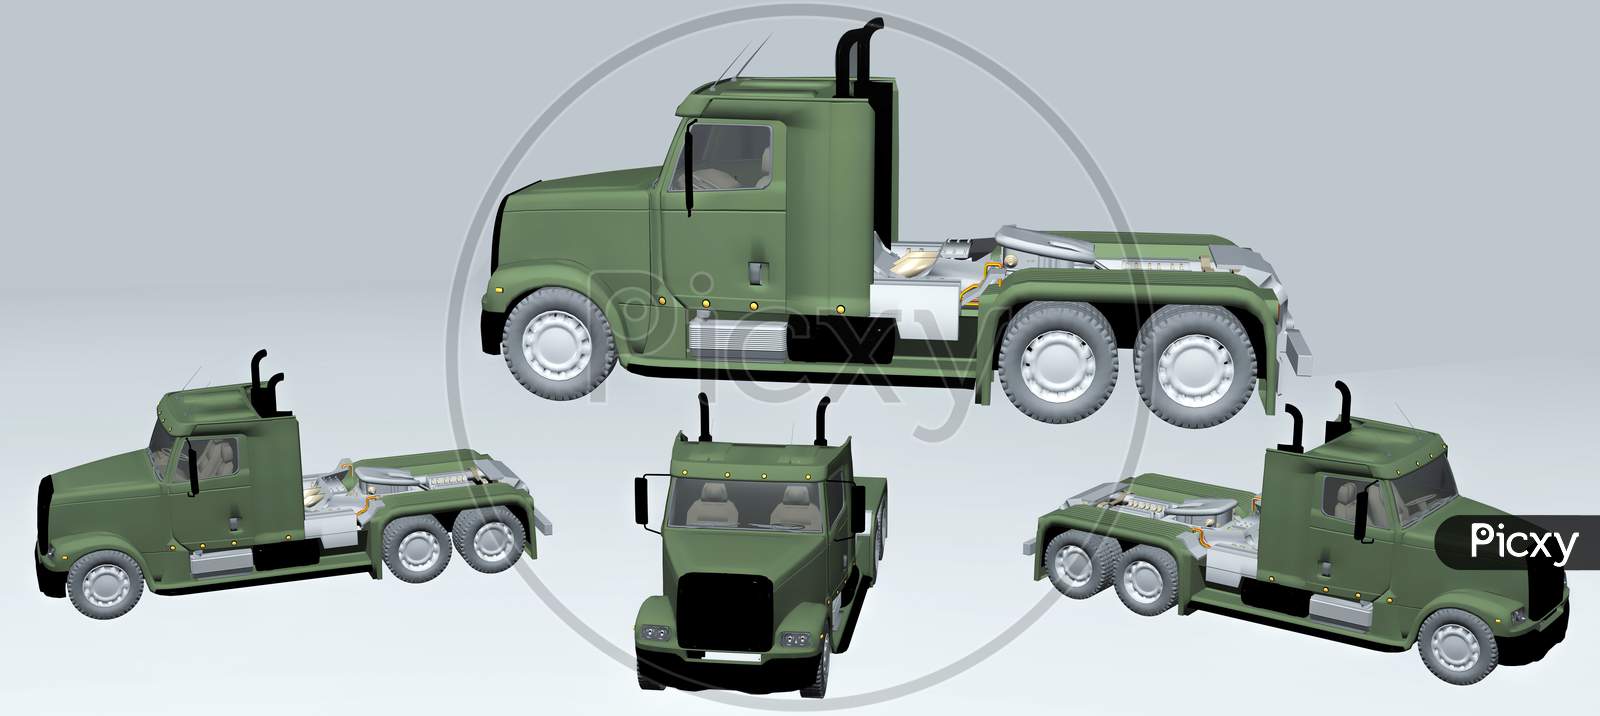 3D Truck Render, 3D Truck Model, Matte Painting, Truck Illustration, For Vfx Projects And Post Move Produciton Projects